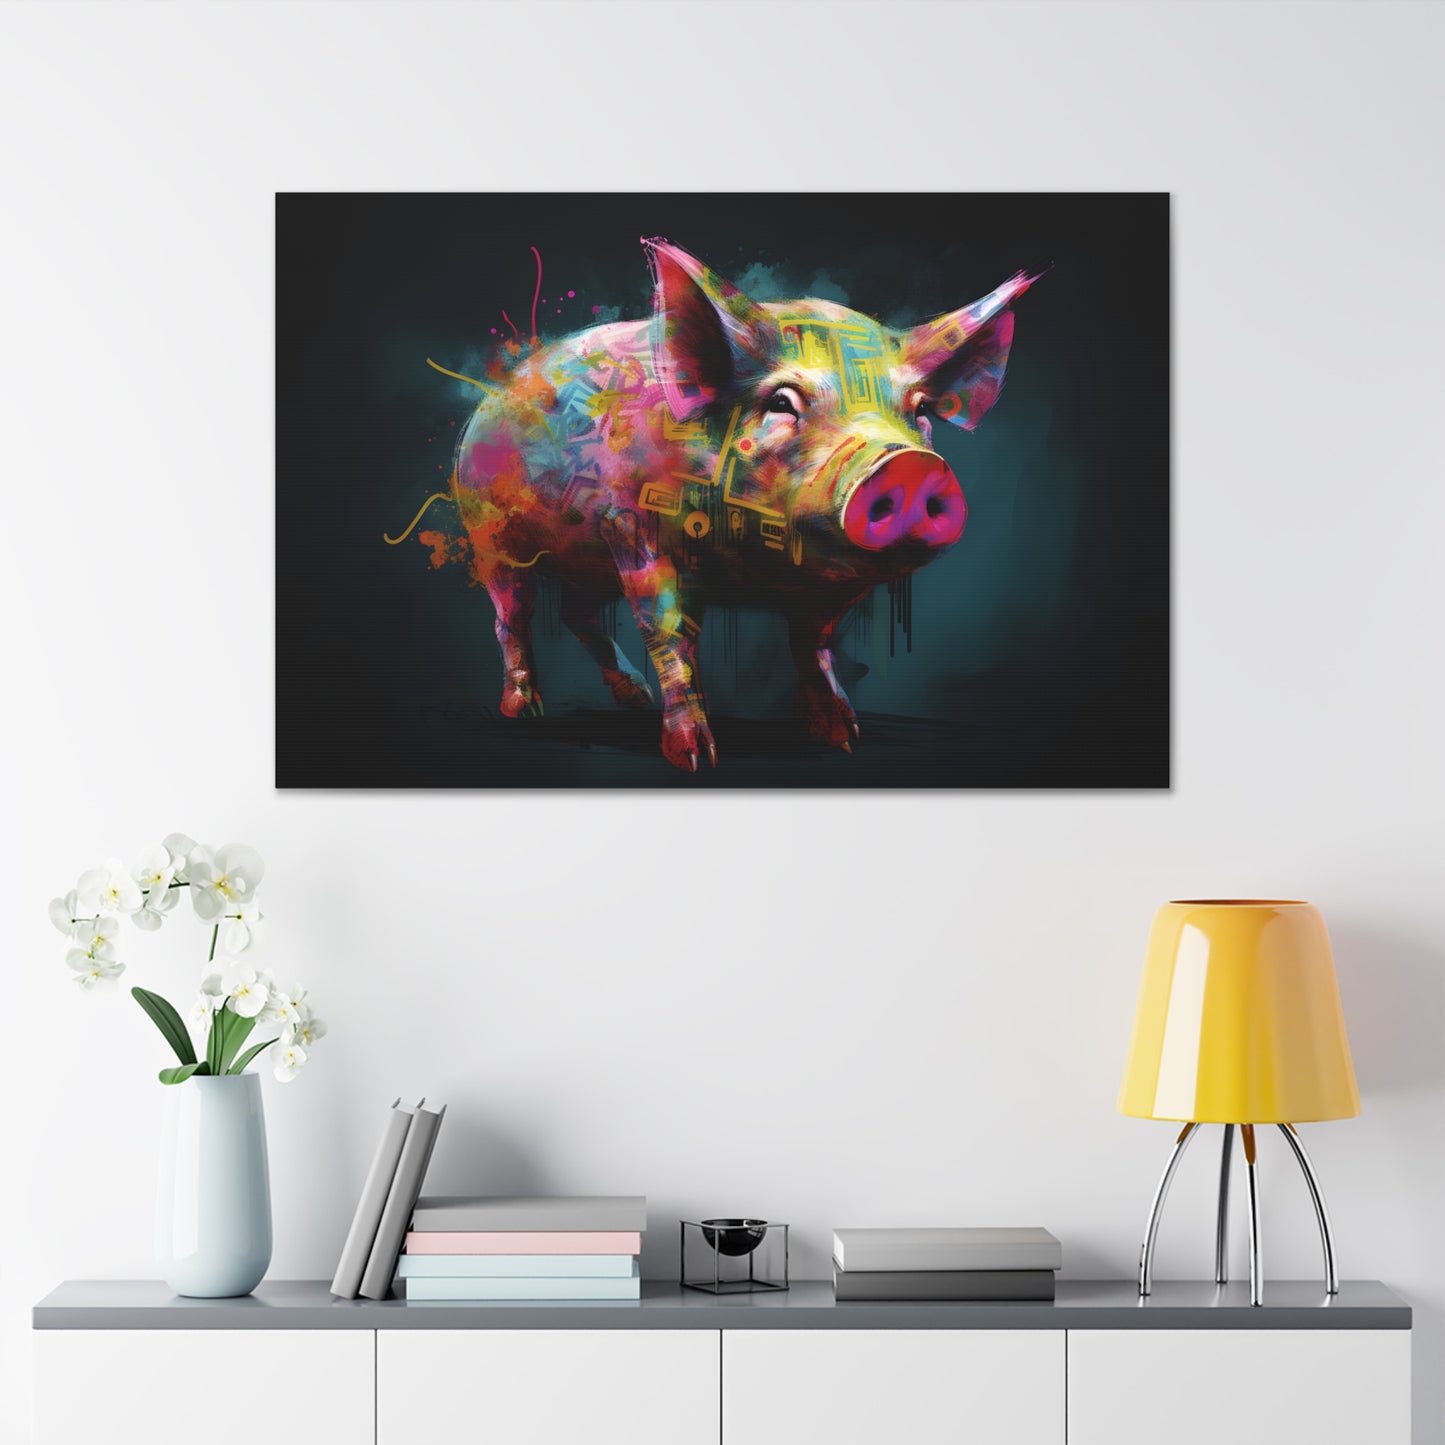 Year Of The Pig (Chinese Zodiac)